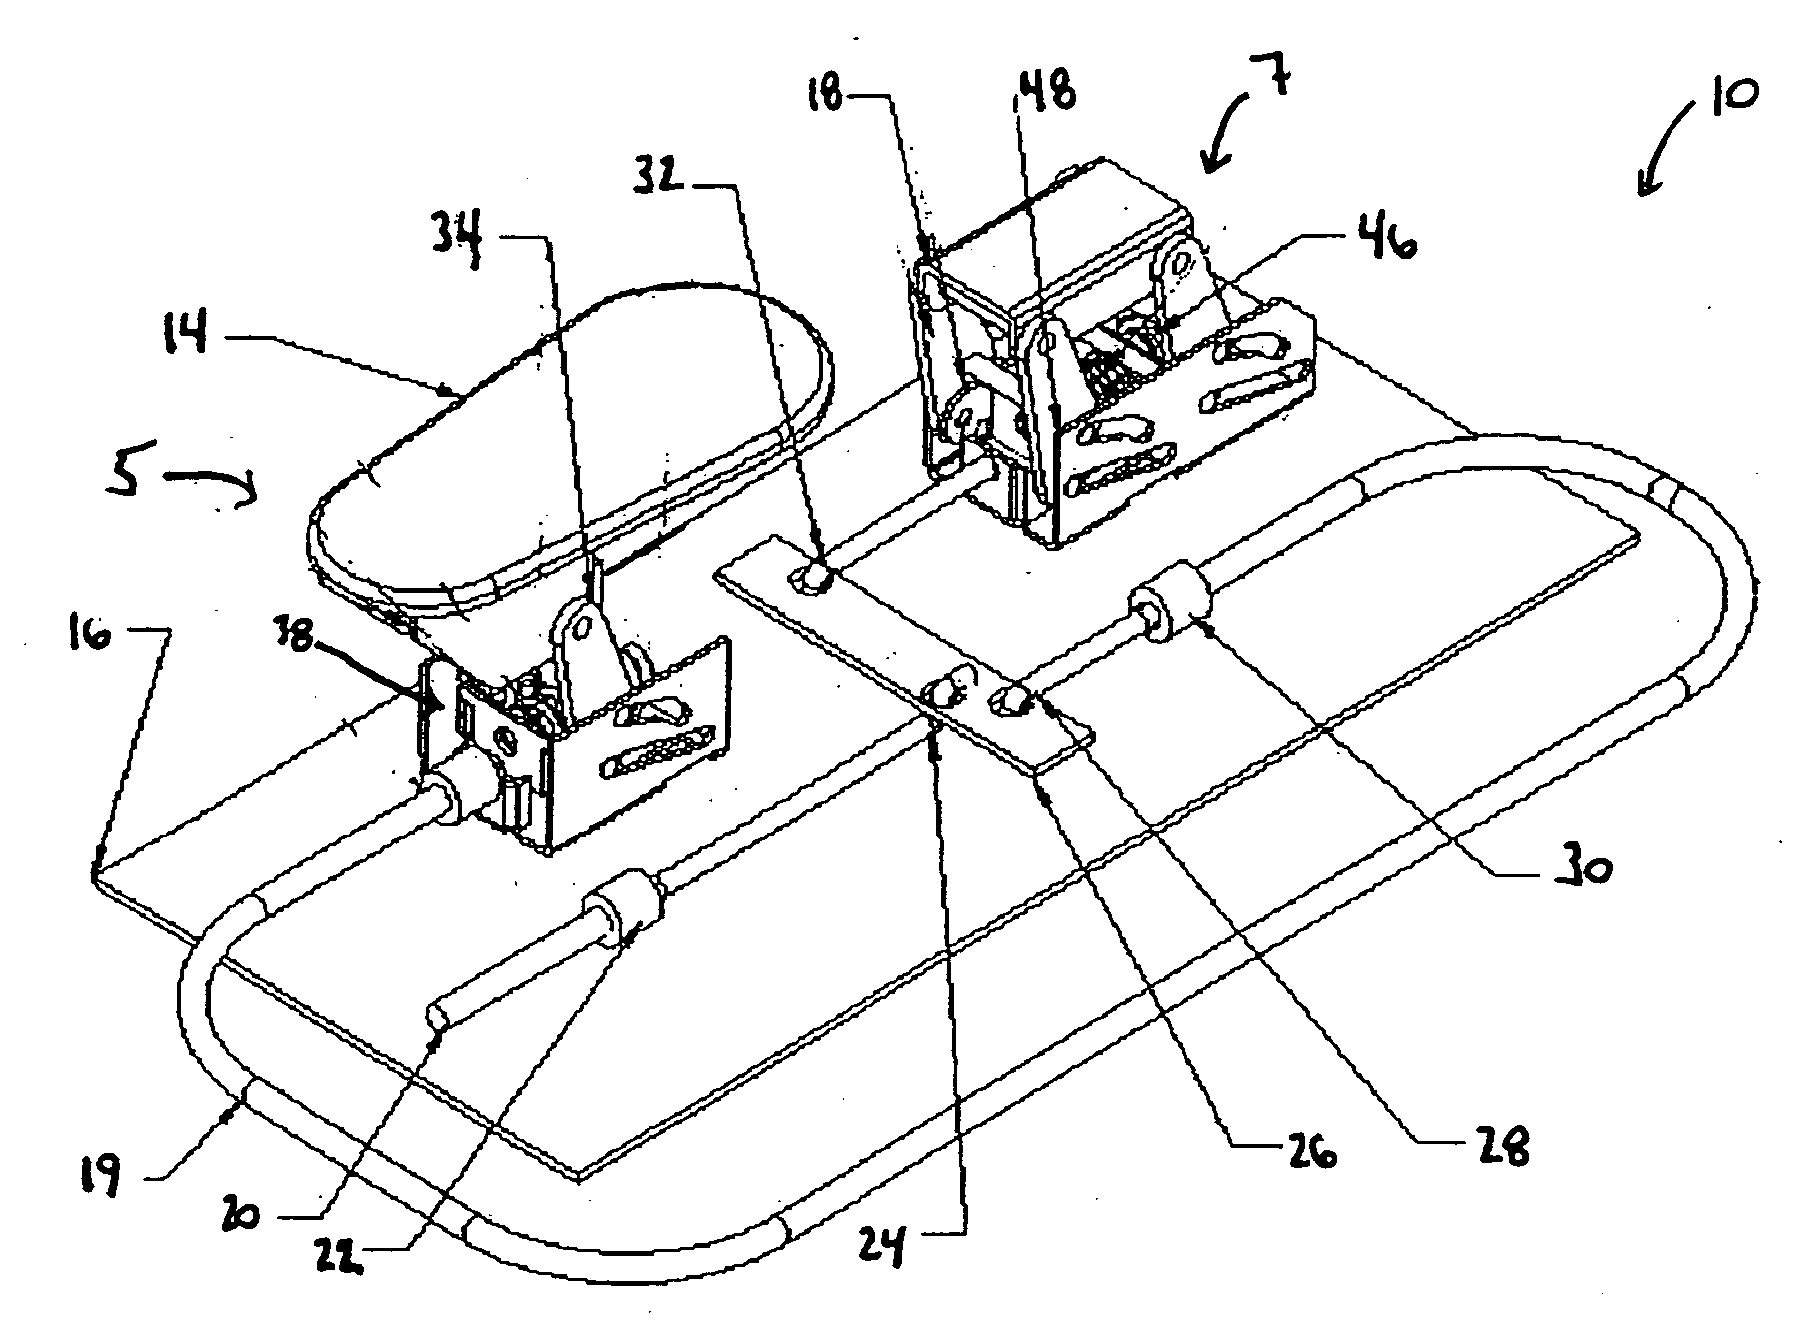 Seat with adjustable support system